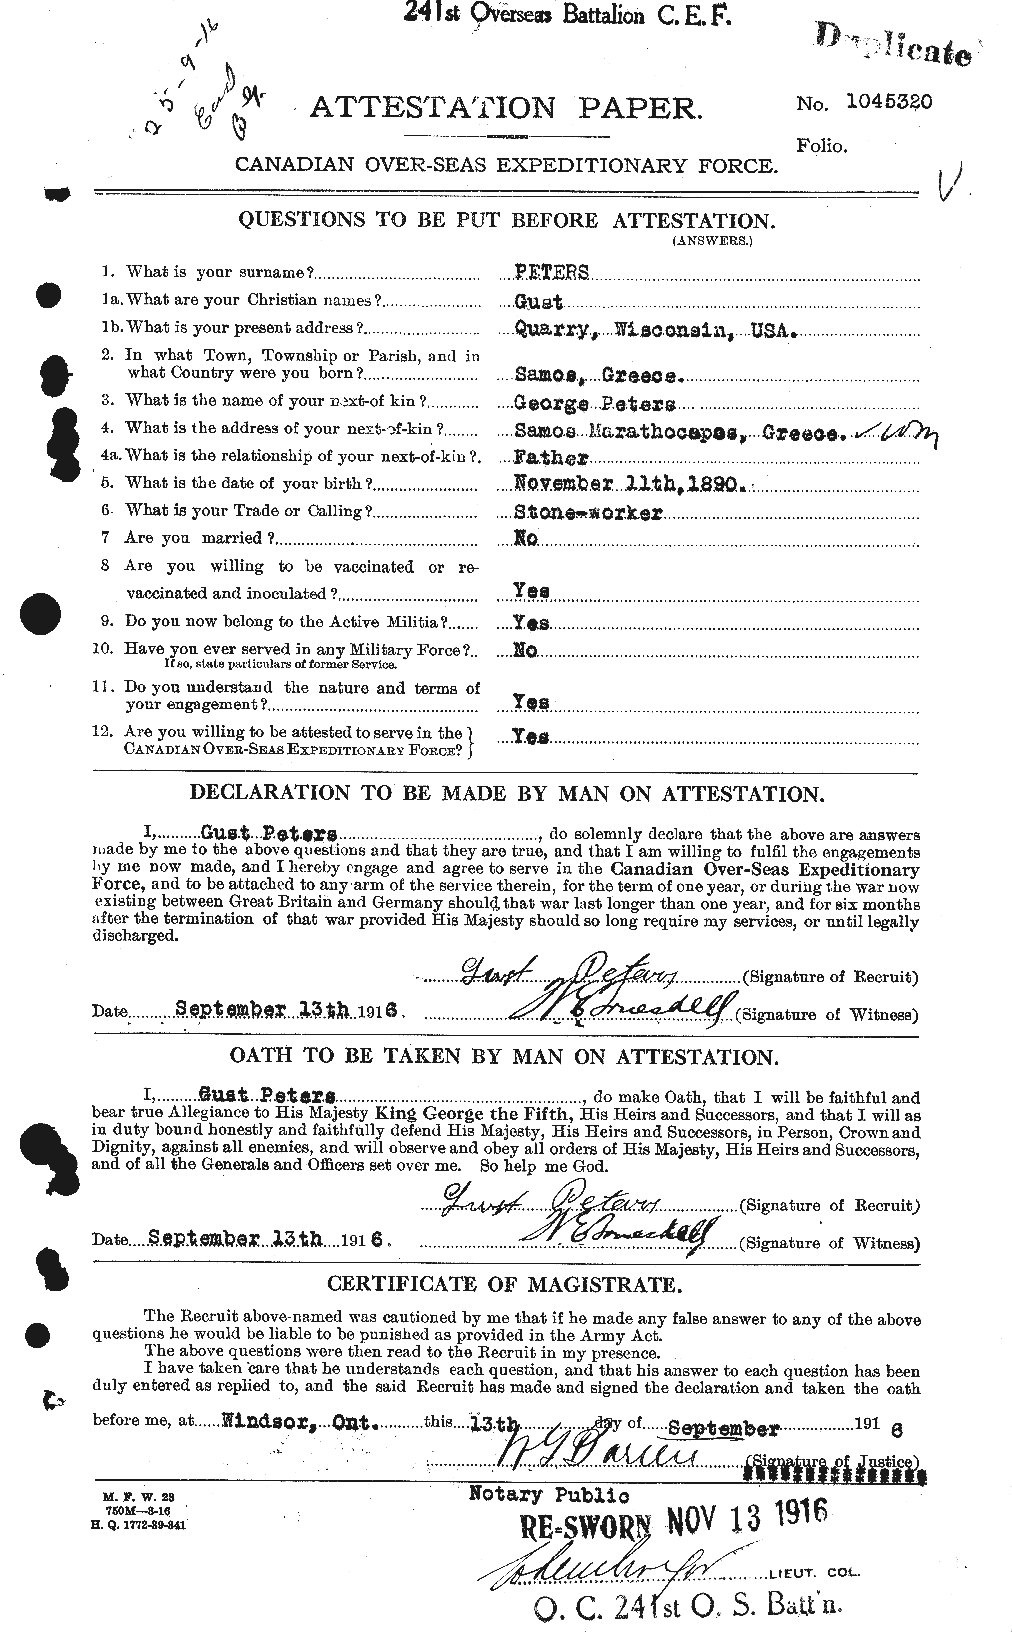 Personnel Records of the First World War - CEF 575473a